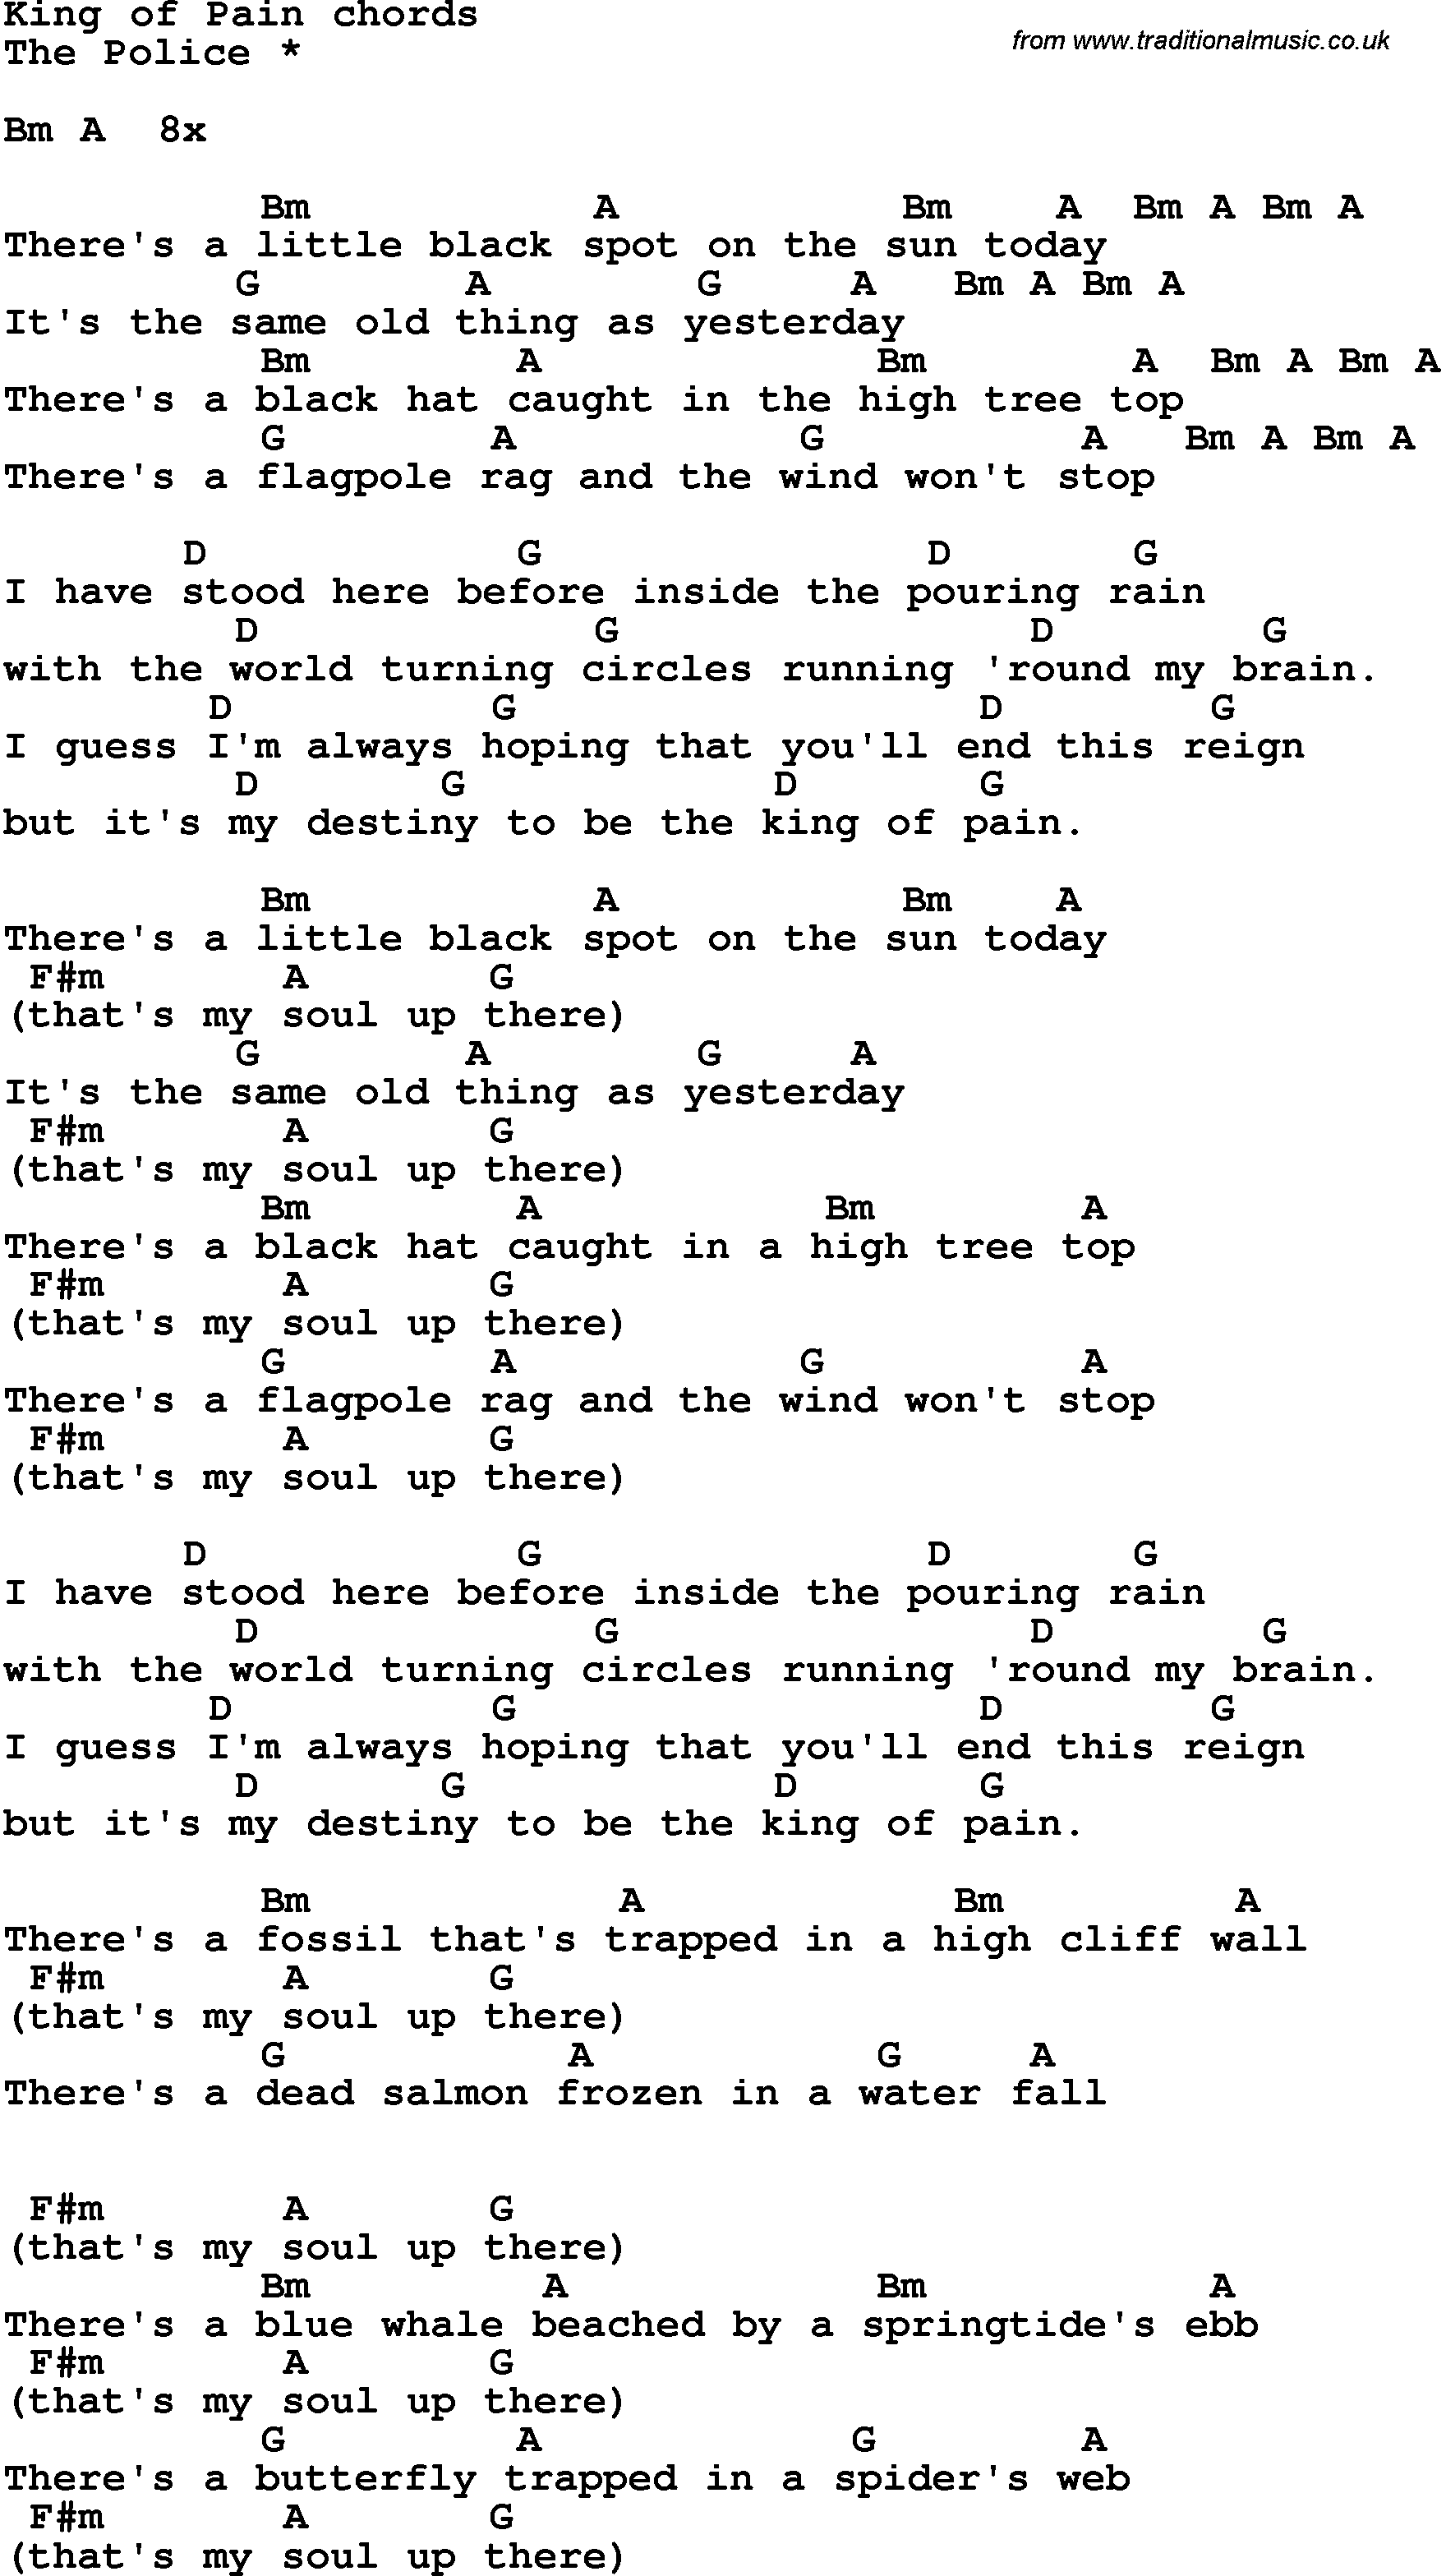 Song Lyrics with guitar chords for Kingof Pain